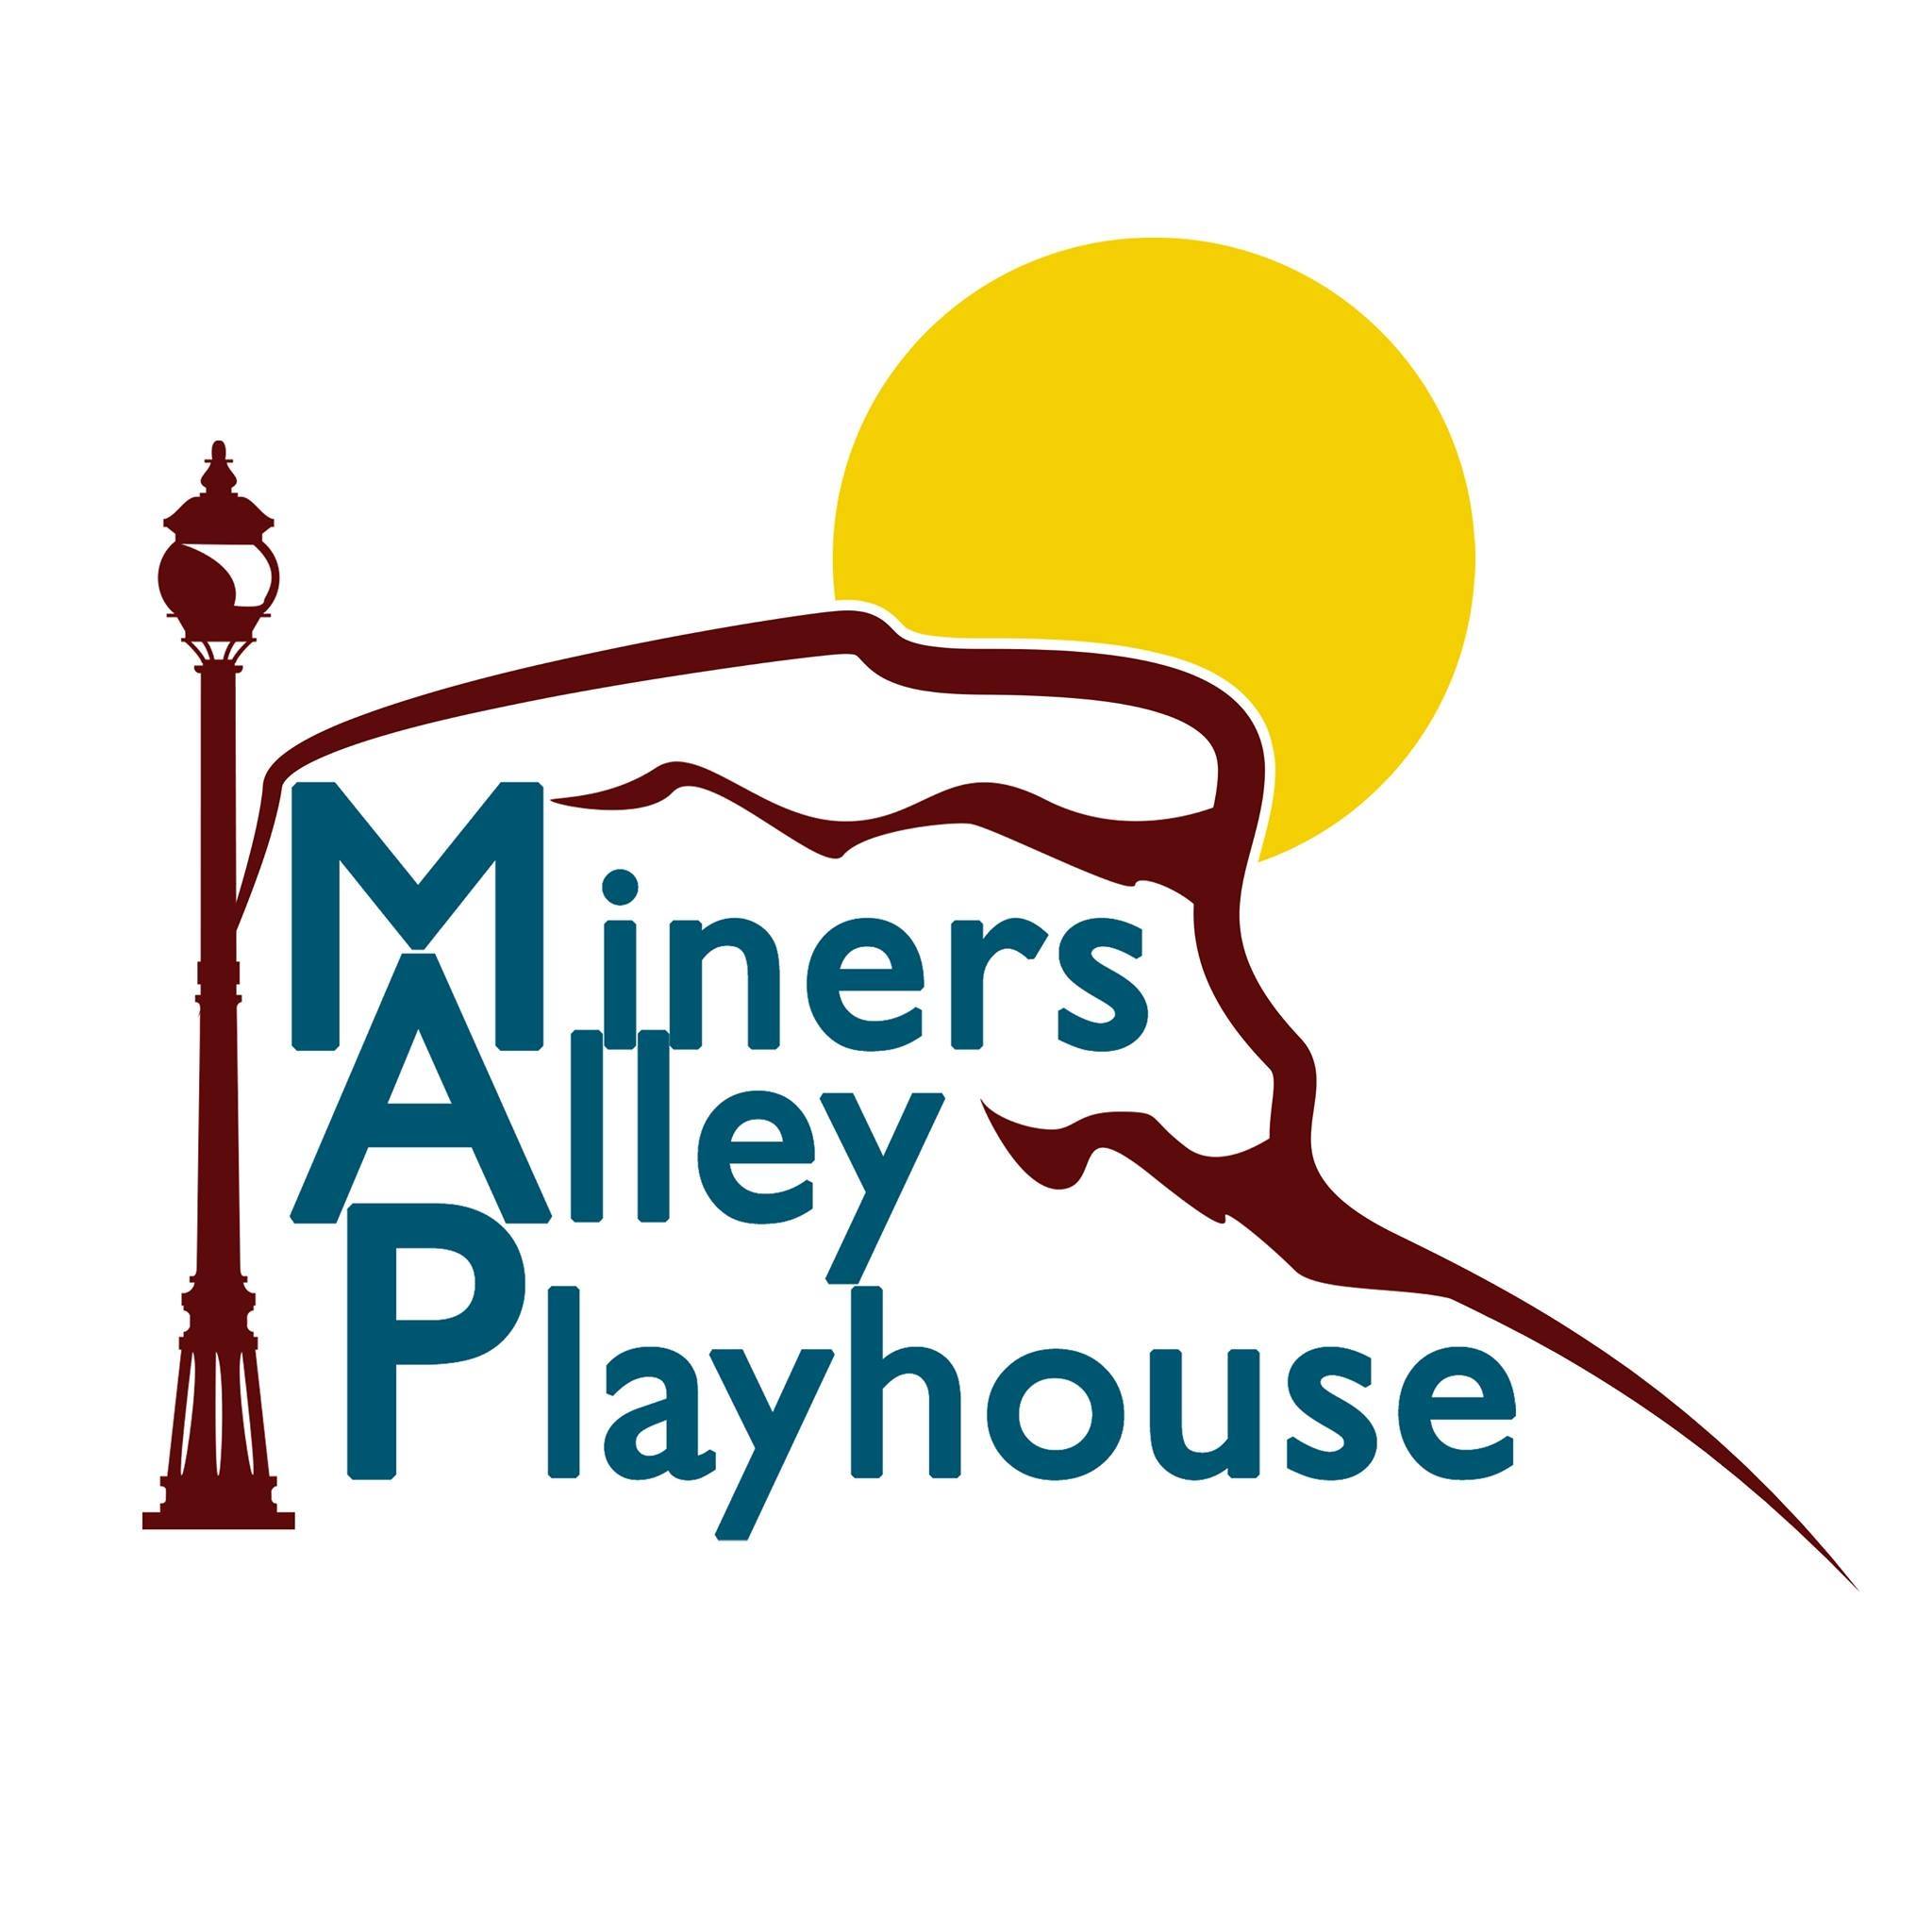 Miners Alley Playhouse logo in color